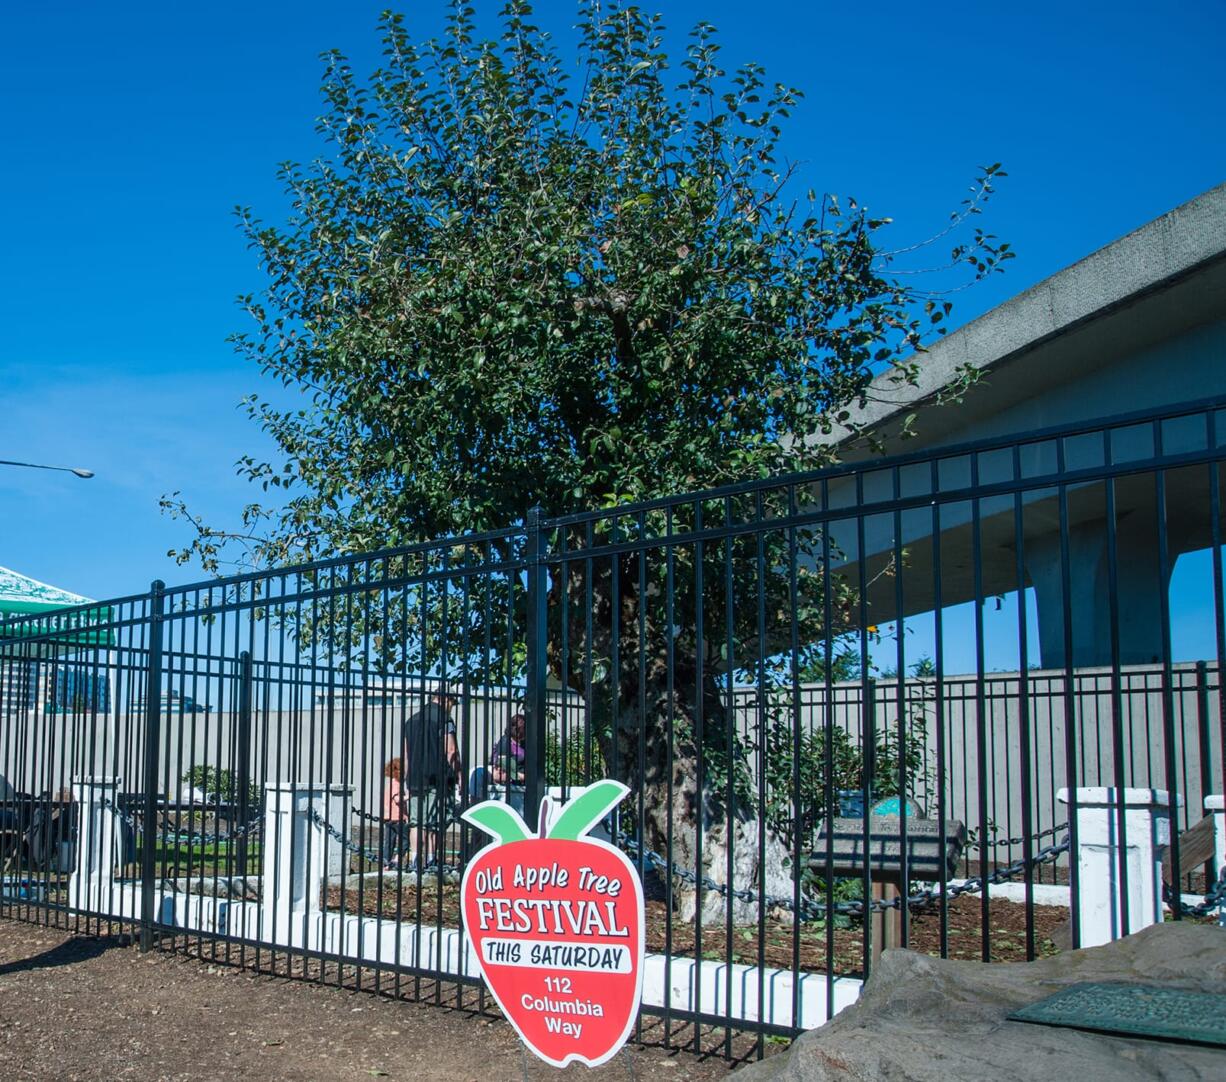 The Old Apple Tree, shown during the 2018 Old Apple Tree Festival, died recently at age 194.